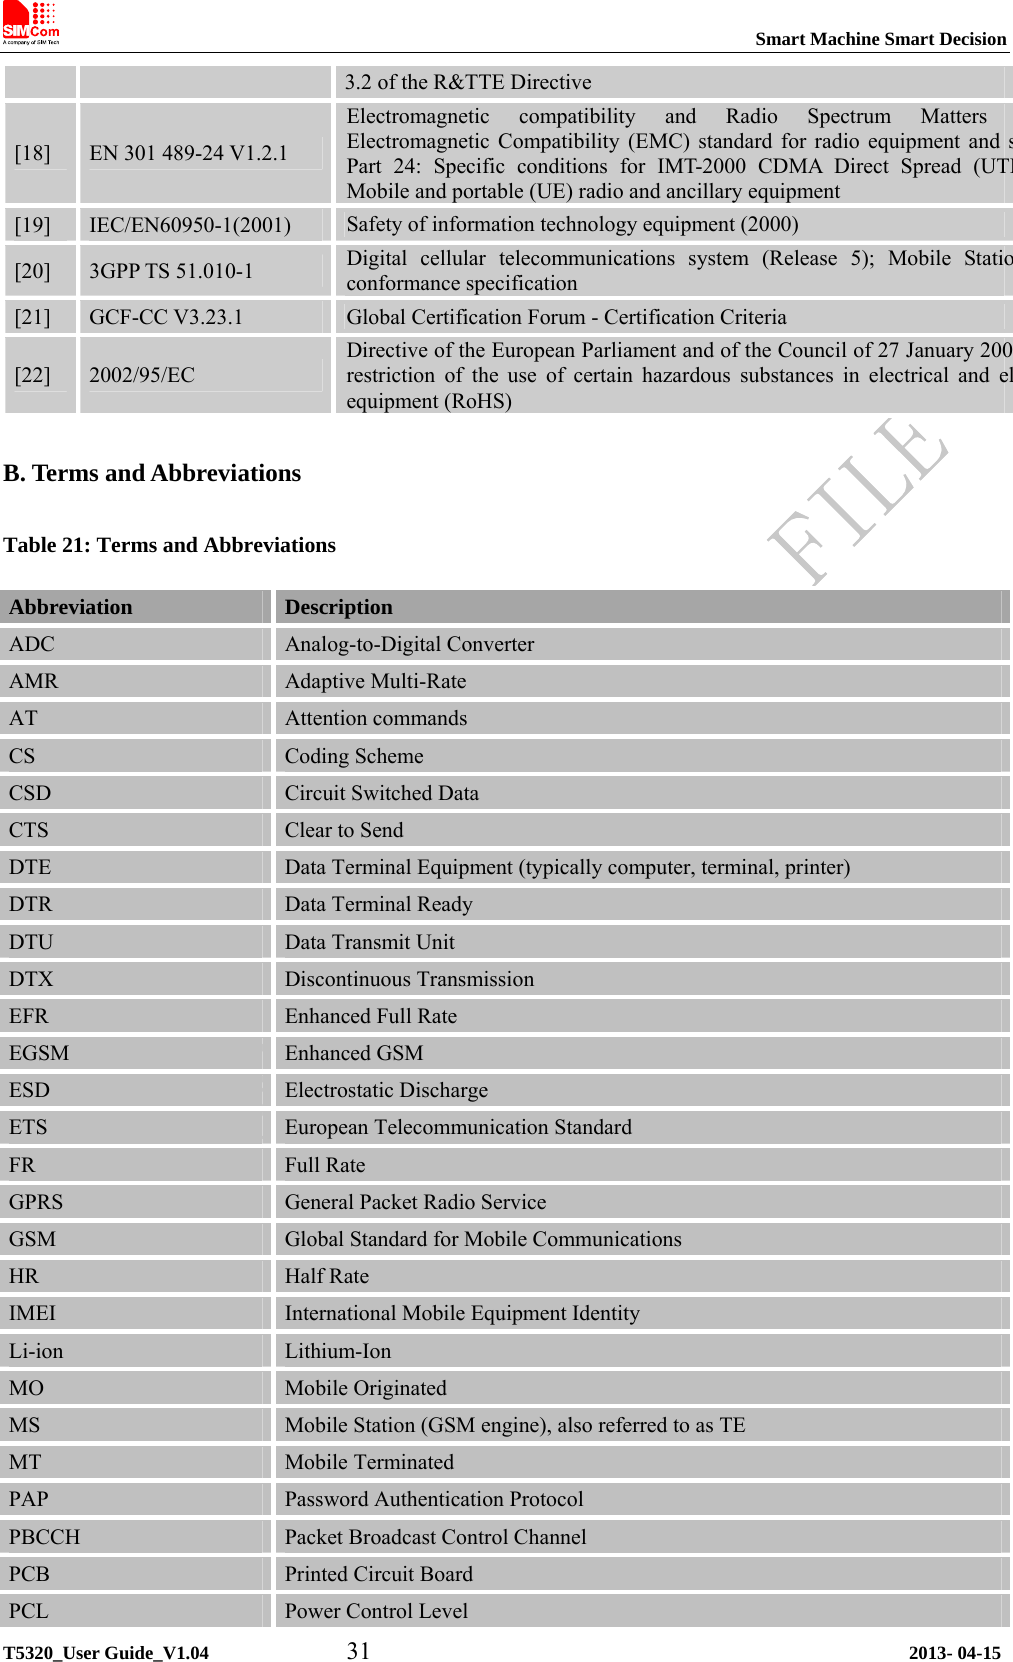                                                                           Smart Machine Smart Decision             T5320_User Guide_V1.04           31                                           2013- 04-15 3.2 of the R&amp;TTE Directive [18]  EN 301 489-24 V1.2.1 Electromagnetic compatibility and Radio Spectrum Matters Electromagnetic Compatibility (EMC) standard for radio equipment and sPart 24: Specific conditions for IMT-2000 CDMA Direct Spread (UTRMobile and portable (UE) radio and ancillary equipment [19]  IEC/EN60950-1(2001)  Safety of information technology equipment (2000) [20]  3GPP TS 51.010-1  Digital cellular telecommunications system (Release 5); Mobile Statioconformance specification [21]  GCF-CC V3.23.1  Global Certification Forum - Certification Criteria [22]  2002/95/EC Directive of the European Parliament and of the Council of 27 January 200restriction of the use of certain hazardous substances in electrical and elequipment (RoHS) B. Terms and Abbreviations Table 21: Terms and Abbreviations Abbreviation   Description ADC   Analog-to-Digital Converter AMR  Adaptive Multi-Rate AT  Attention commands CS   Coding Scheme CSD   Circuit Switched Data CTS   Clear to Send DTE   Data Terminal Equipment (typically computer, terminal, printer) DTR   Data Terminal Ready DTU  Data Transmit Unit   DTX   Discontinuous Transmission EFR   Enhanced Full Rate EGSM   Enhanced GSM ESD   Electrostatic Discharge ETS   European Telecommunication Standard FR   Full Rate GPRS   General Packet Radio Service GSM   Global Standard for Mobile Communications HR   Half Rate IMEI   International Mobile Equipment Identity Li-ion  Lithium-Ion MO   Mobile Originated MS   Mobile Station (GSM engine), also referred to as TE MT   Mobile Terminated PAP   Password Authentication Protocol PBCCH   Packet Broadcast Control Channel PCB   Printed Circuit Board PCL  Power Control Level 